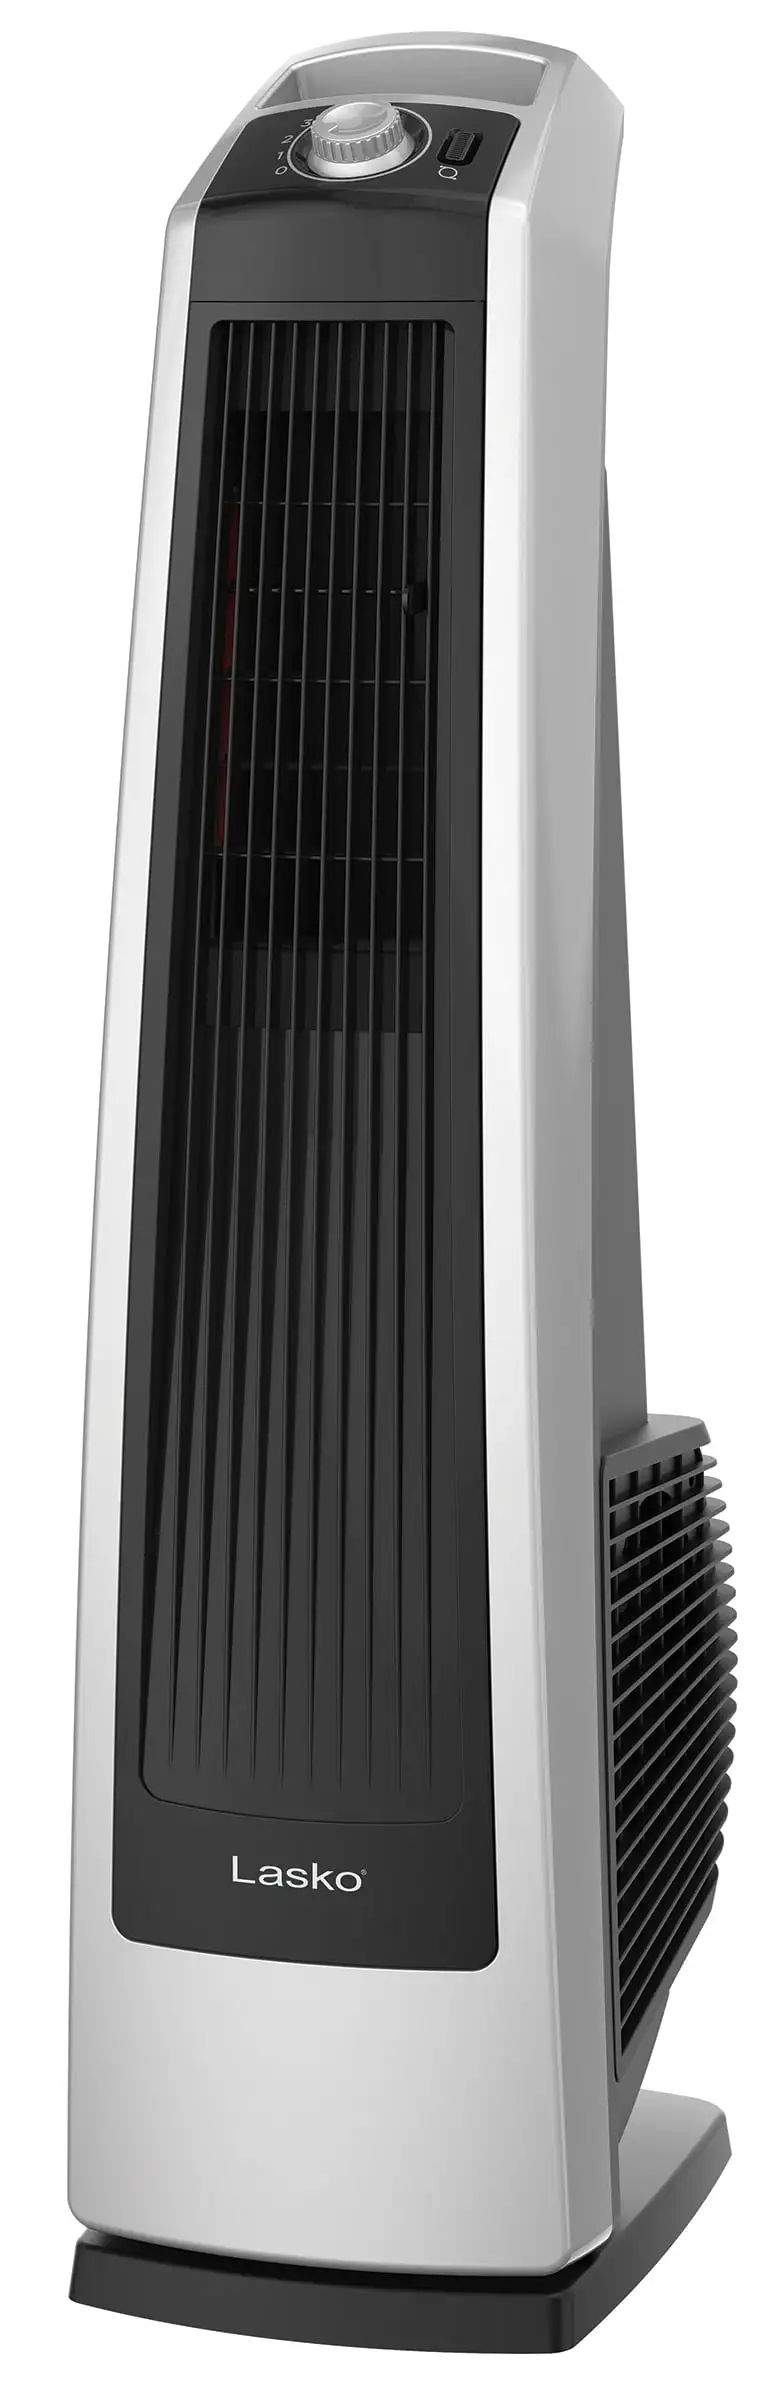 Oscillating High Velocity Tower Fan with 3 Speeds  U35105  Gray/Black air cooler free shipping